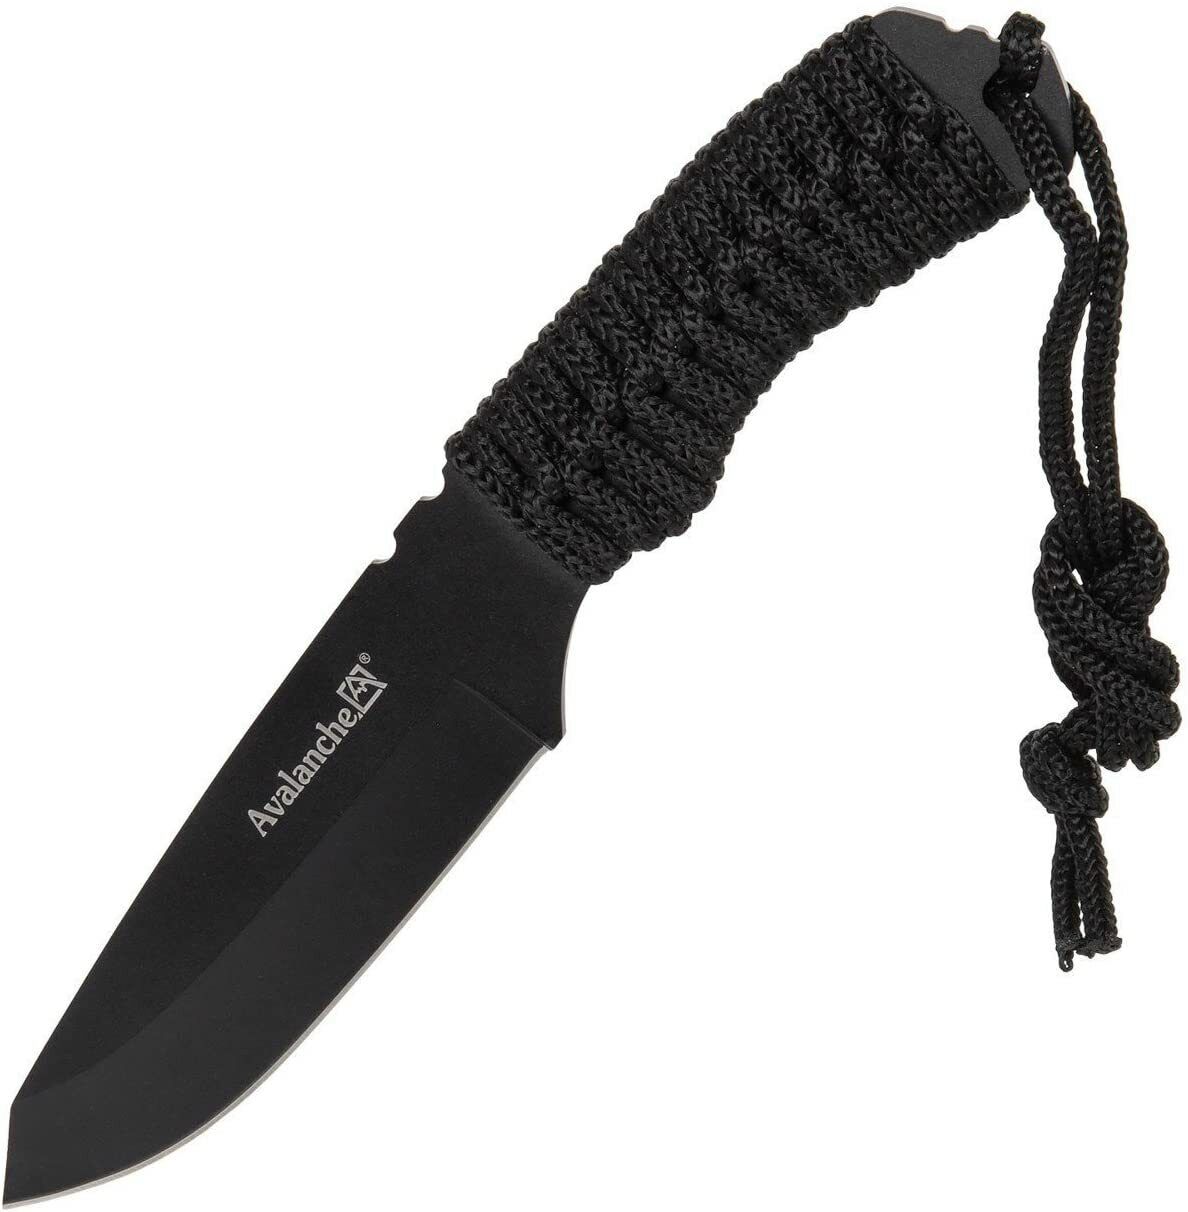 NEW Avalanche Rope Handle Camping Knife 4” Blade Stainless Steel 